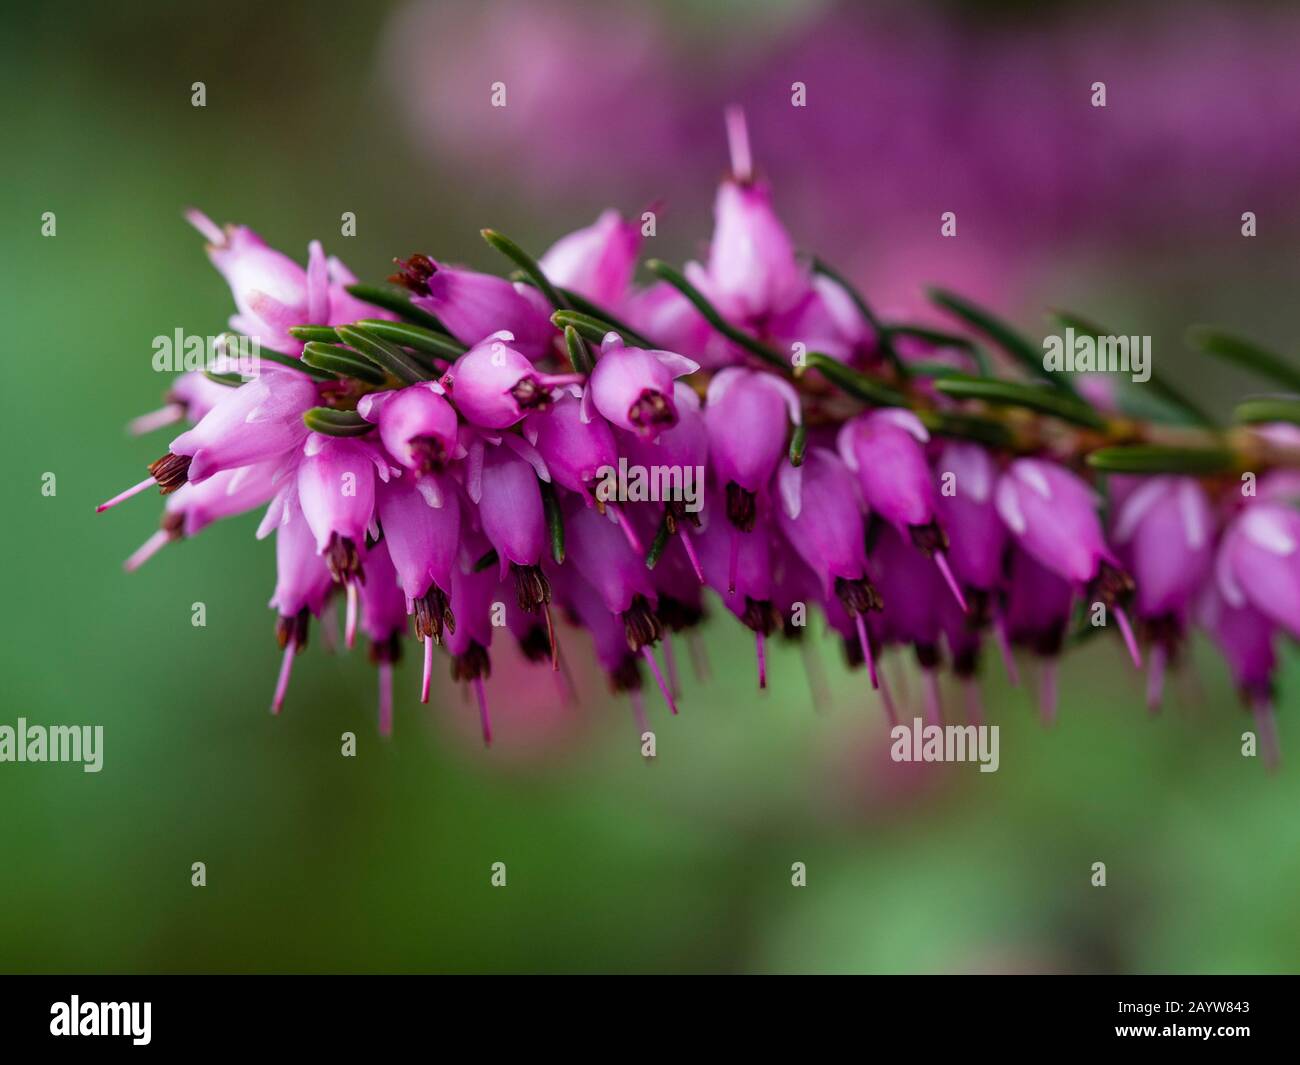 Close up of pink flowers on heather Erica × darleyensis Stock Photo